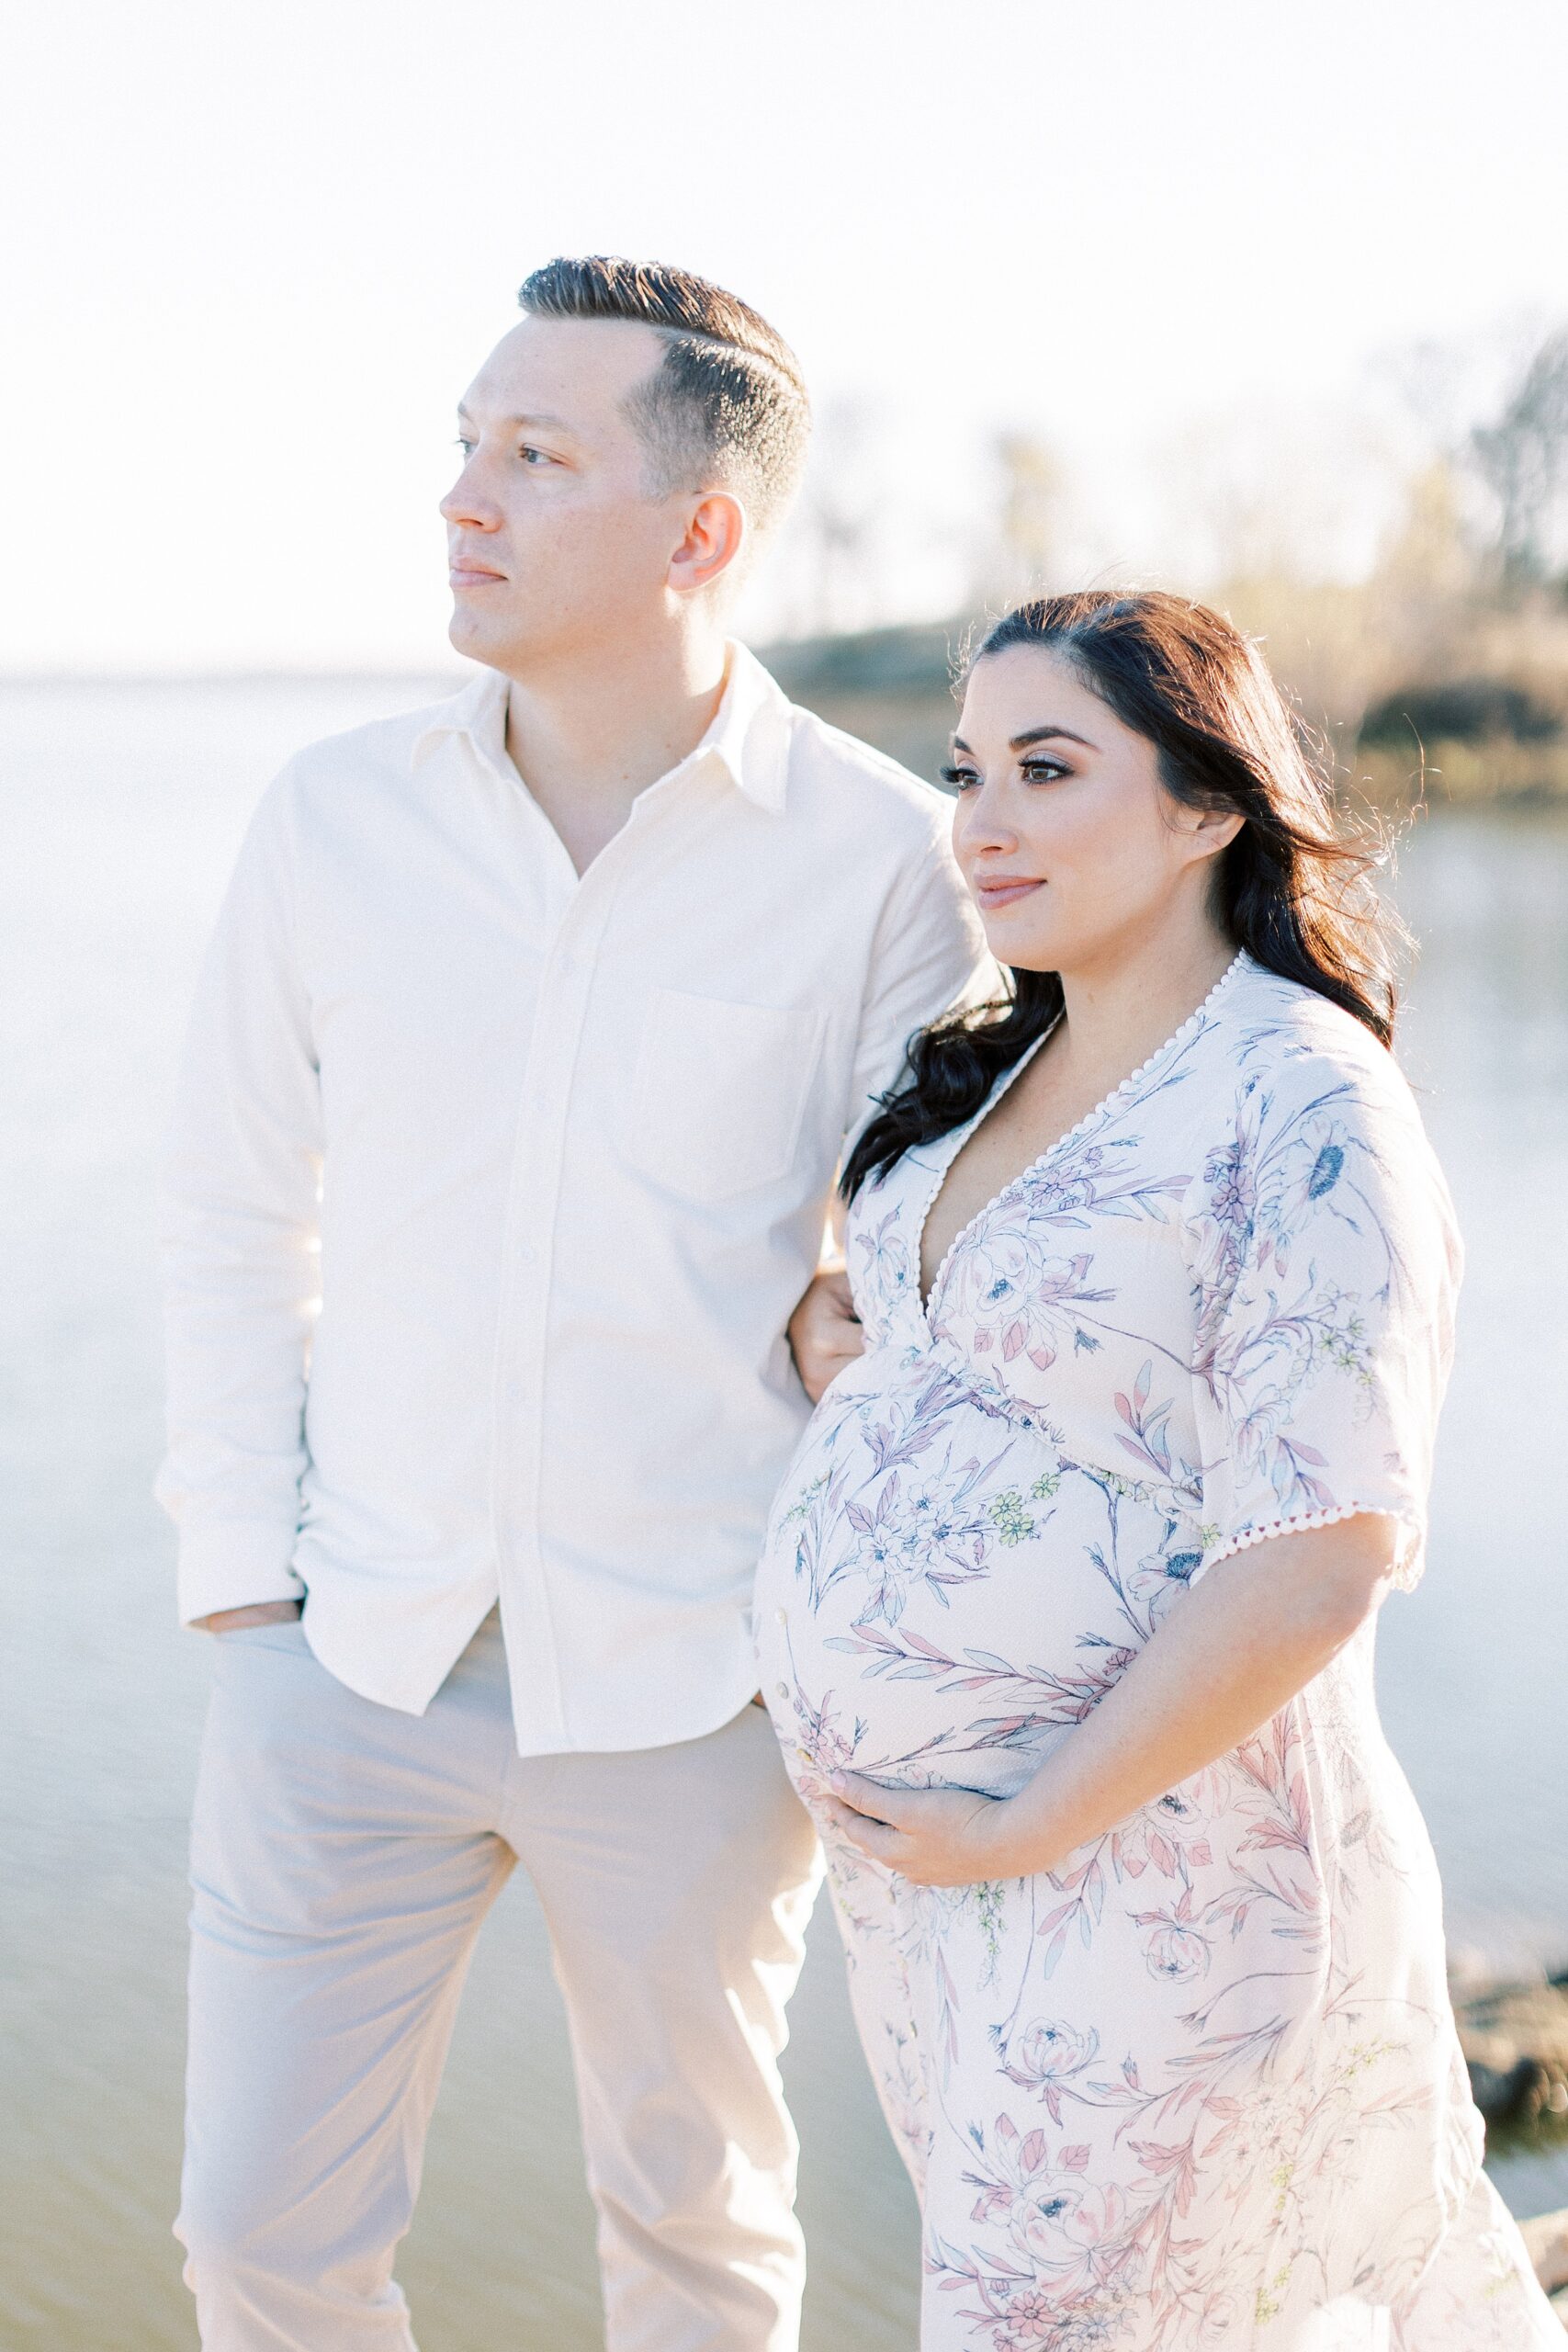 A mother to be in a floral printed maternity dress stands on a beach looking out to the water with her husband after meeting a Postpartum Doula Dallas